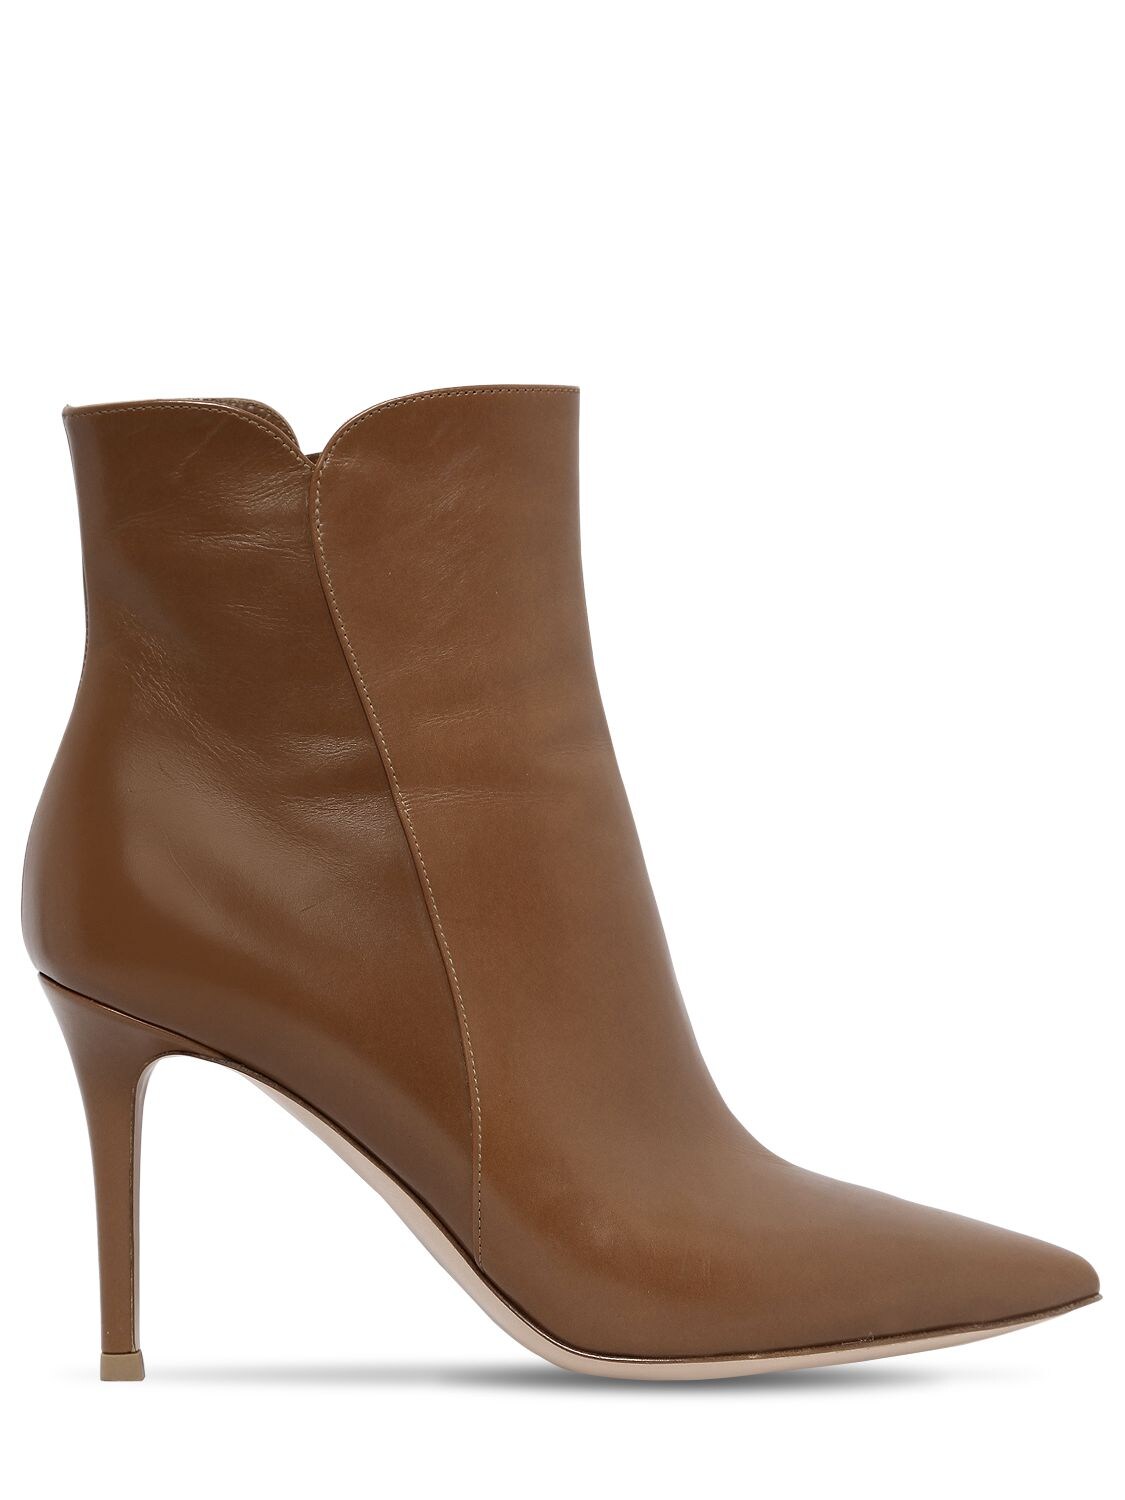 Gianvito Rossi 85mm Levy Leather Ankle Boots In Tan